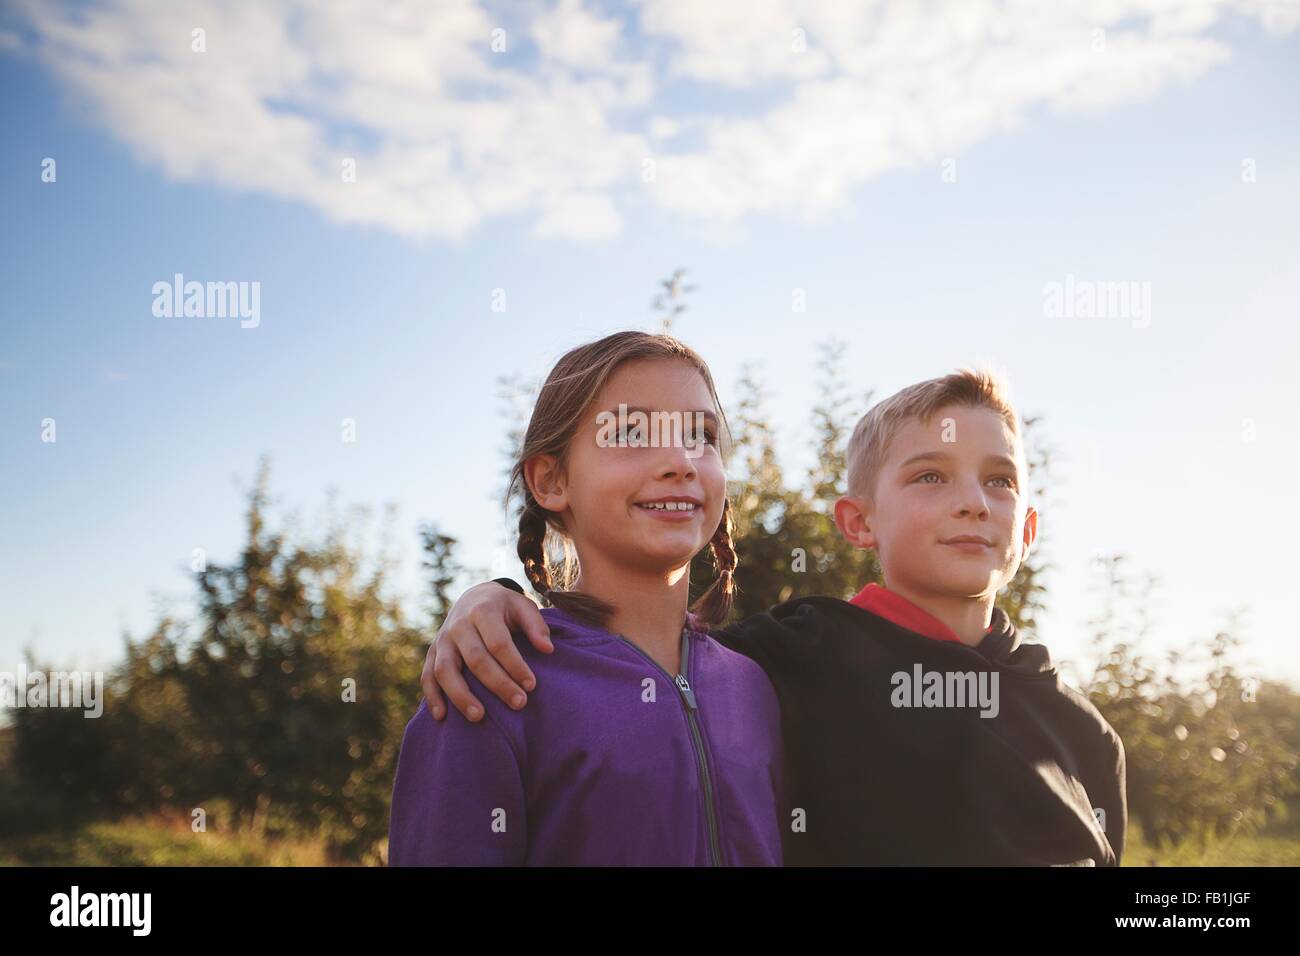 Low angle view of boy outdoors with arms around girl looking away smiling Stock Photo